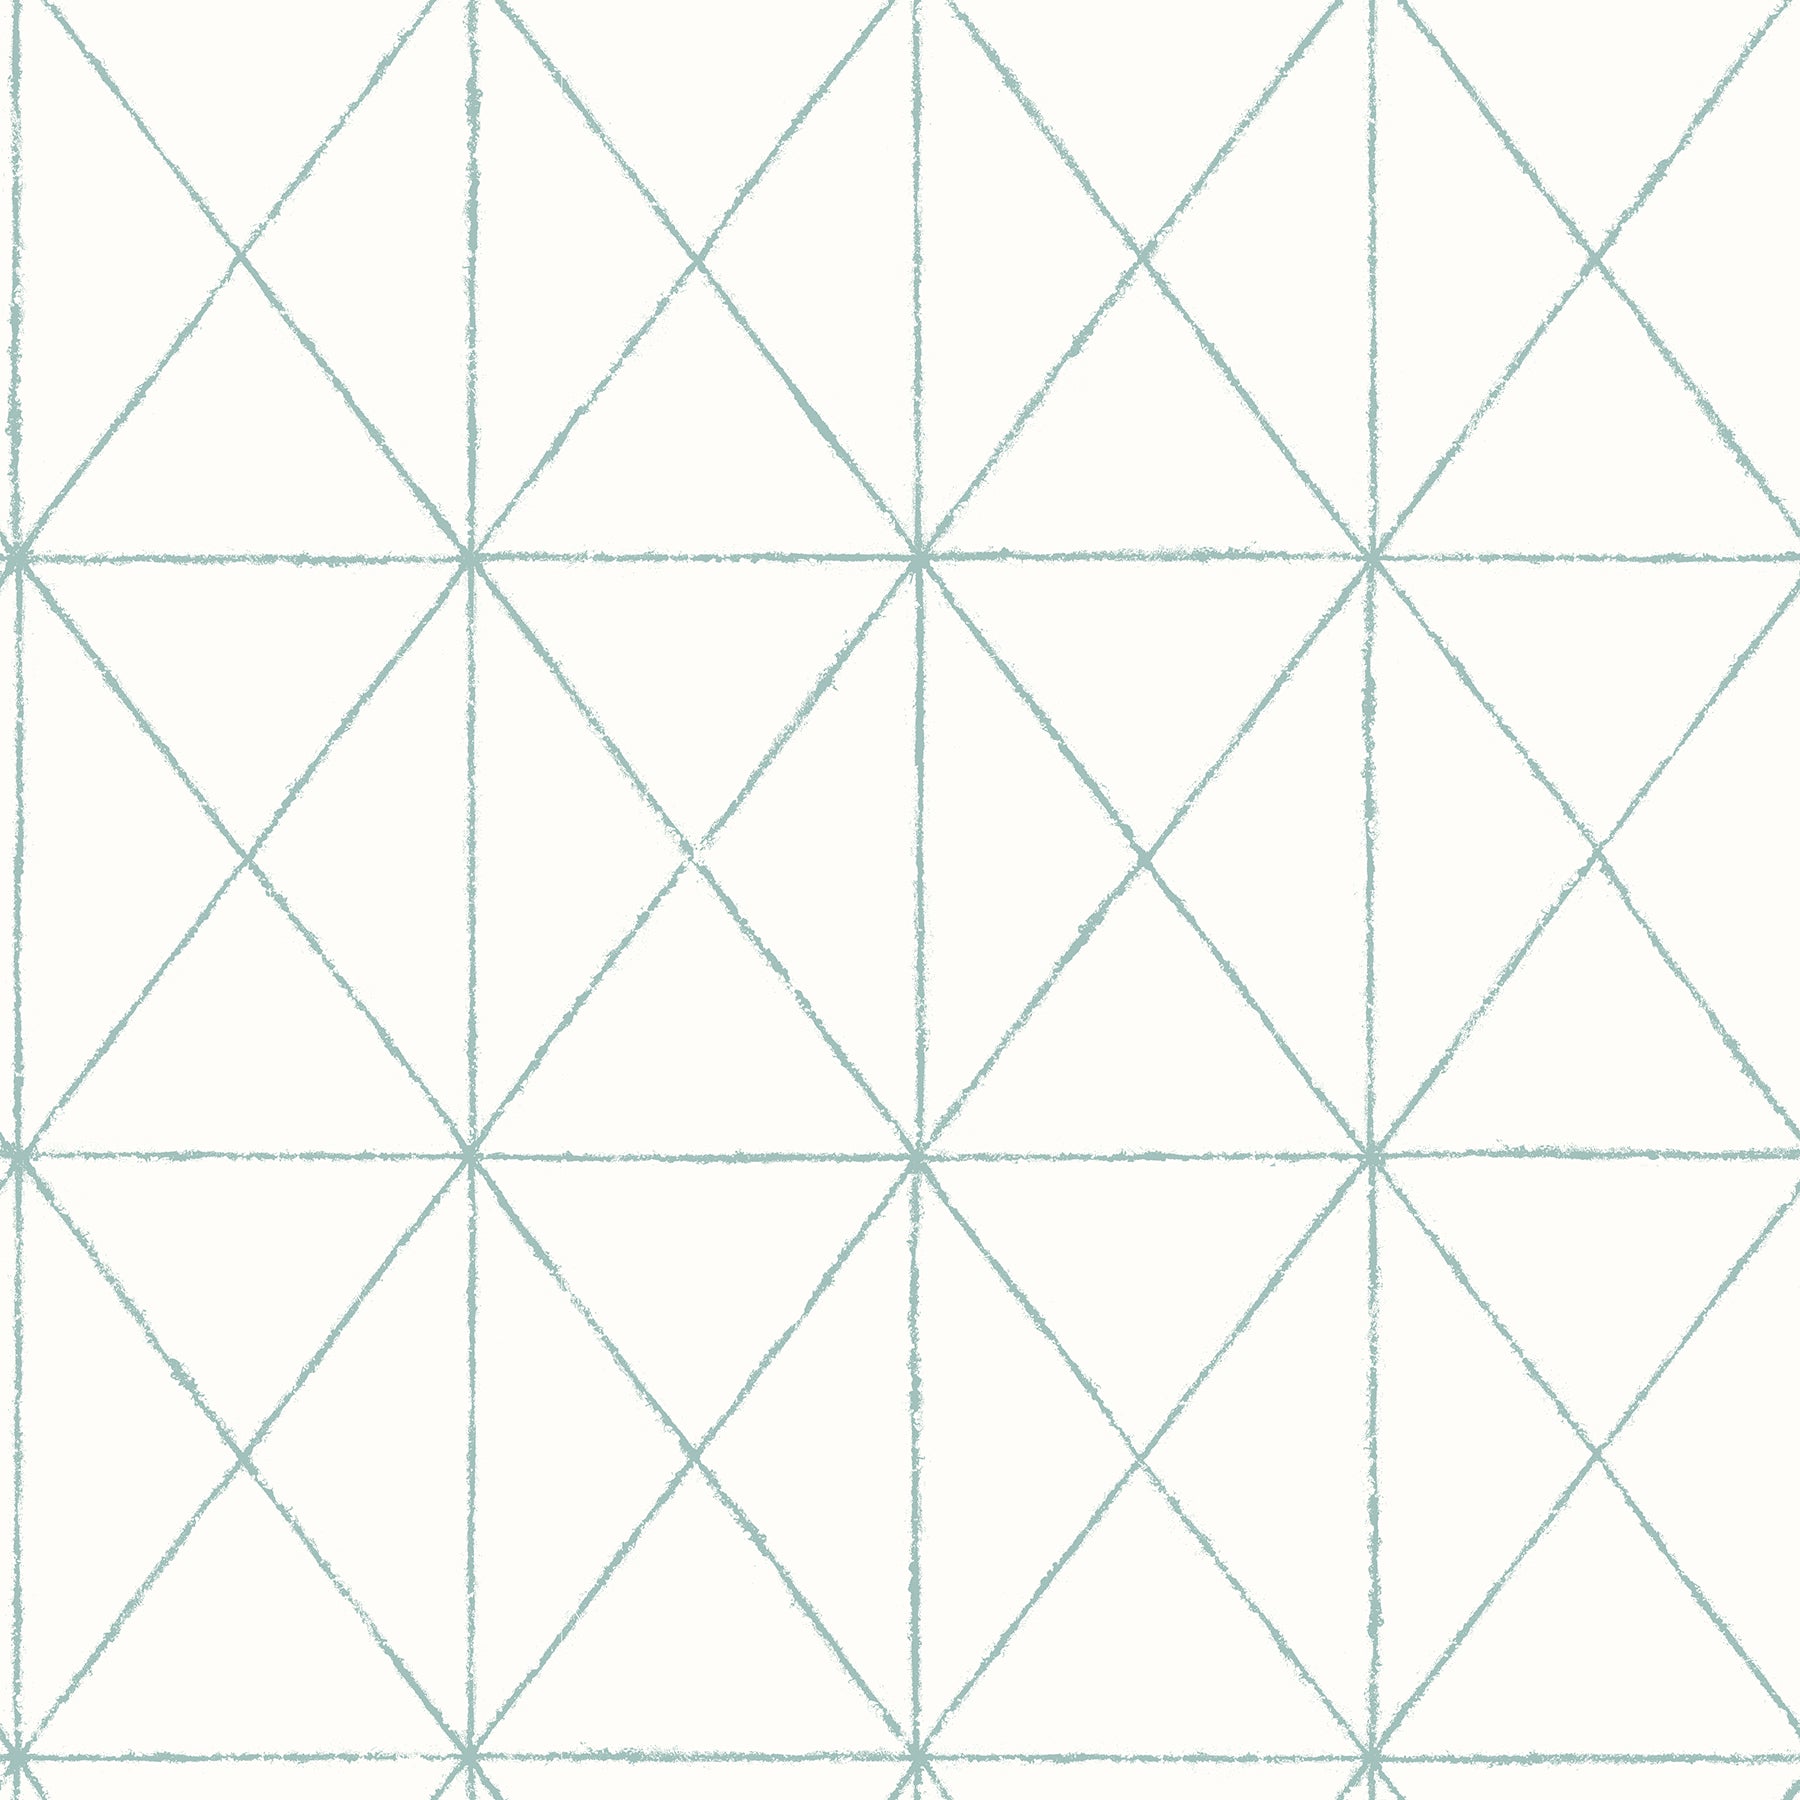 Looking for 2697-78004 Intersection Turquoise Geometric A-Street Prints Wallpaper